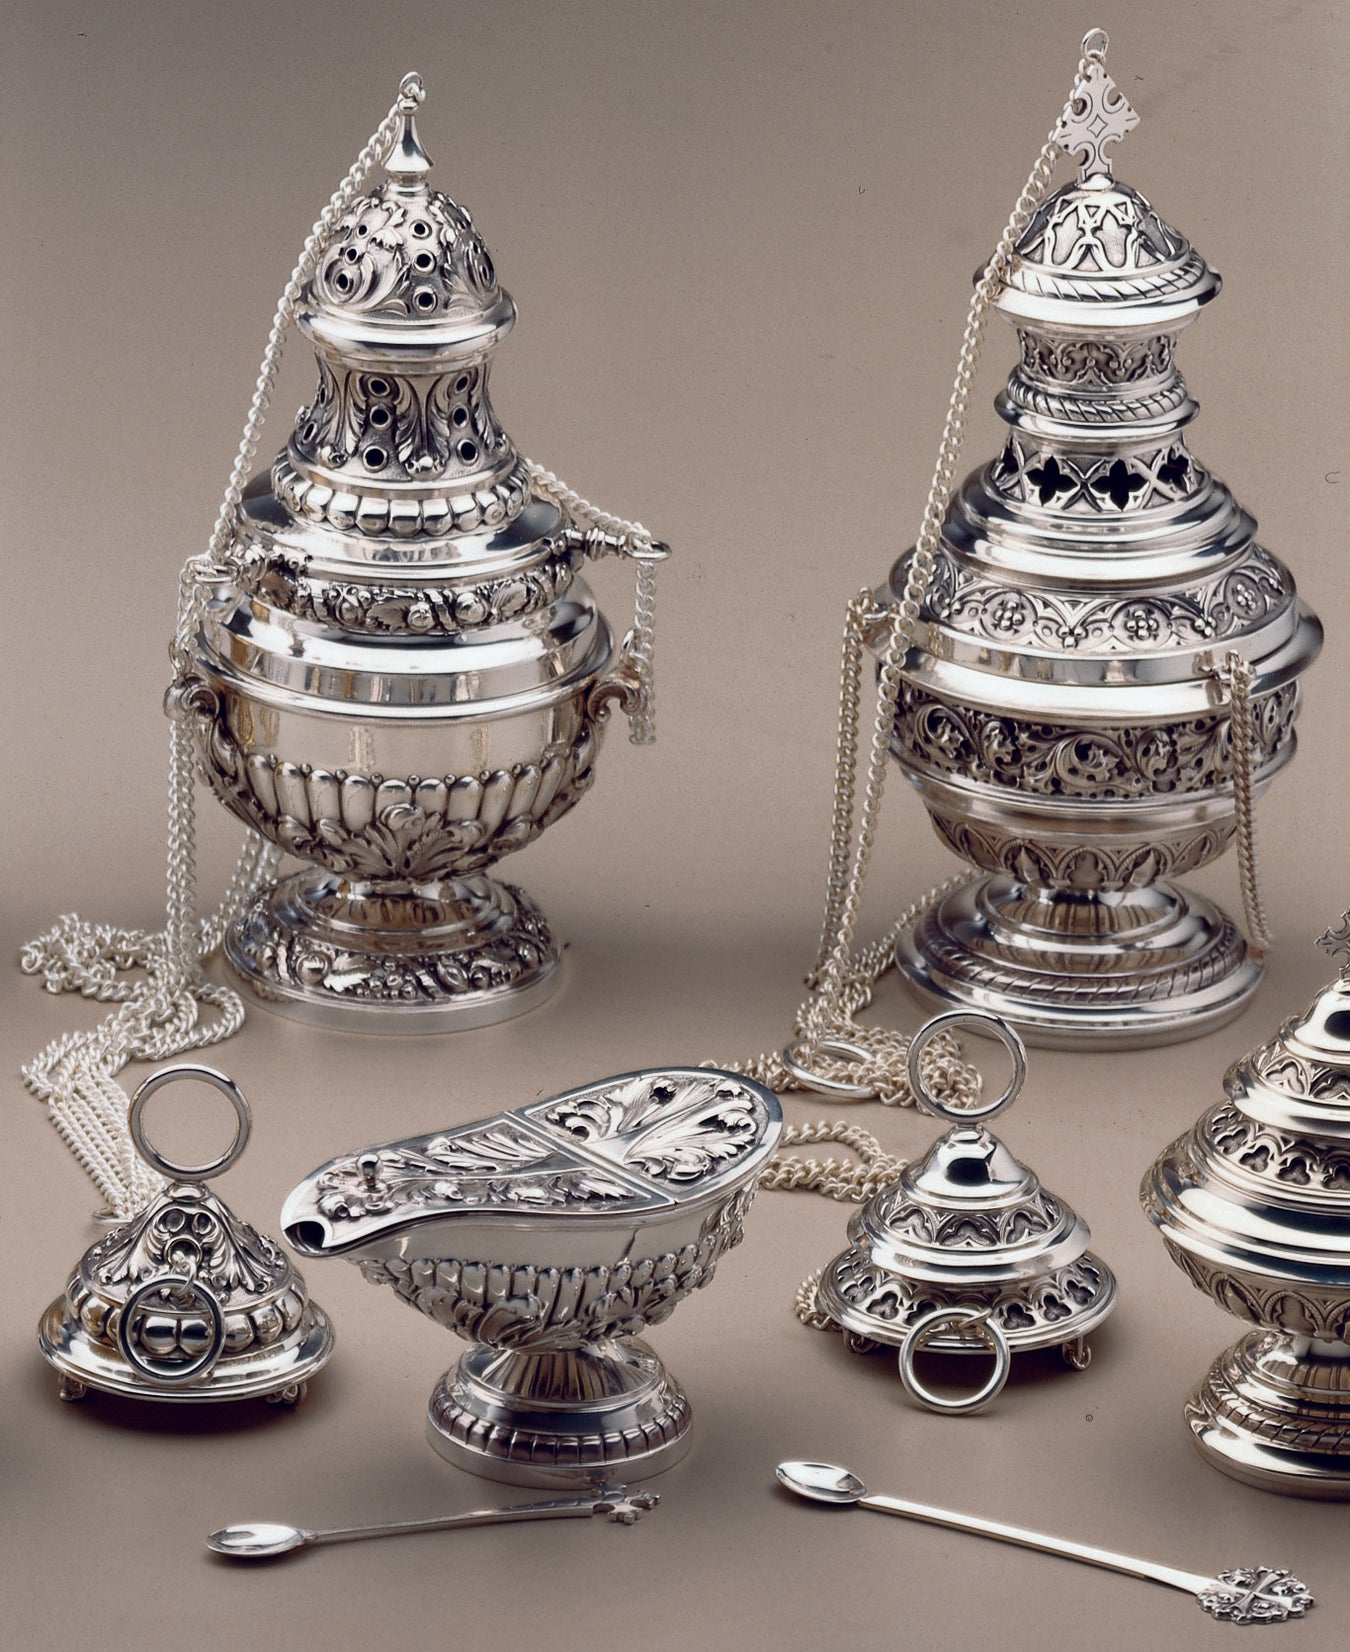 Incense Burners and Censers – Matthew F. Sheehan